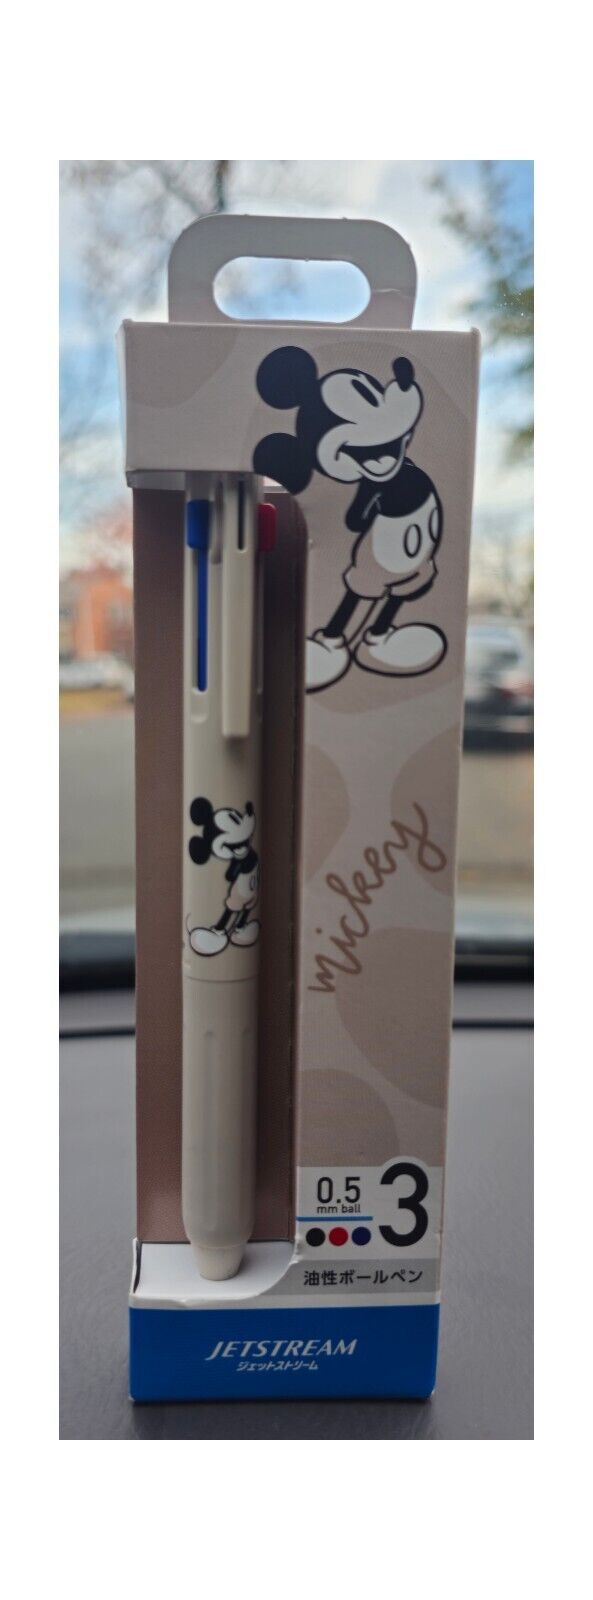 Disney Store Mickey Jetstream 3Color Pen Pencil Exclusive MADEINJAPAN US SELLER 